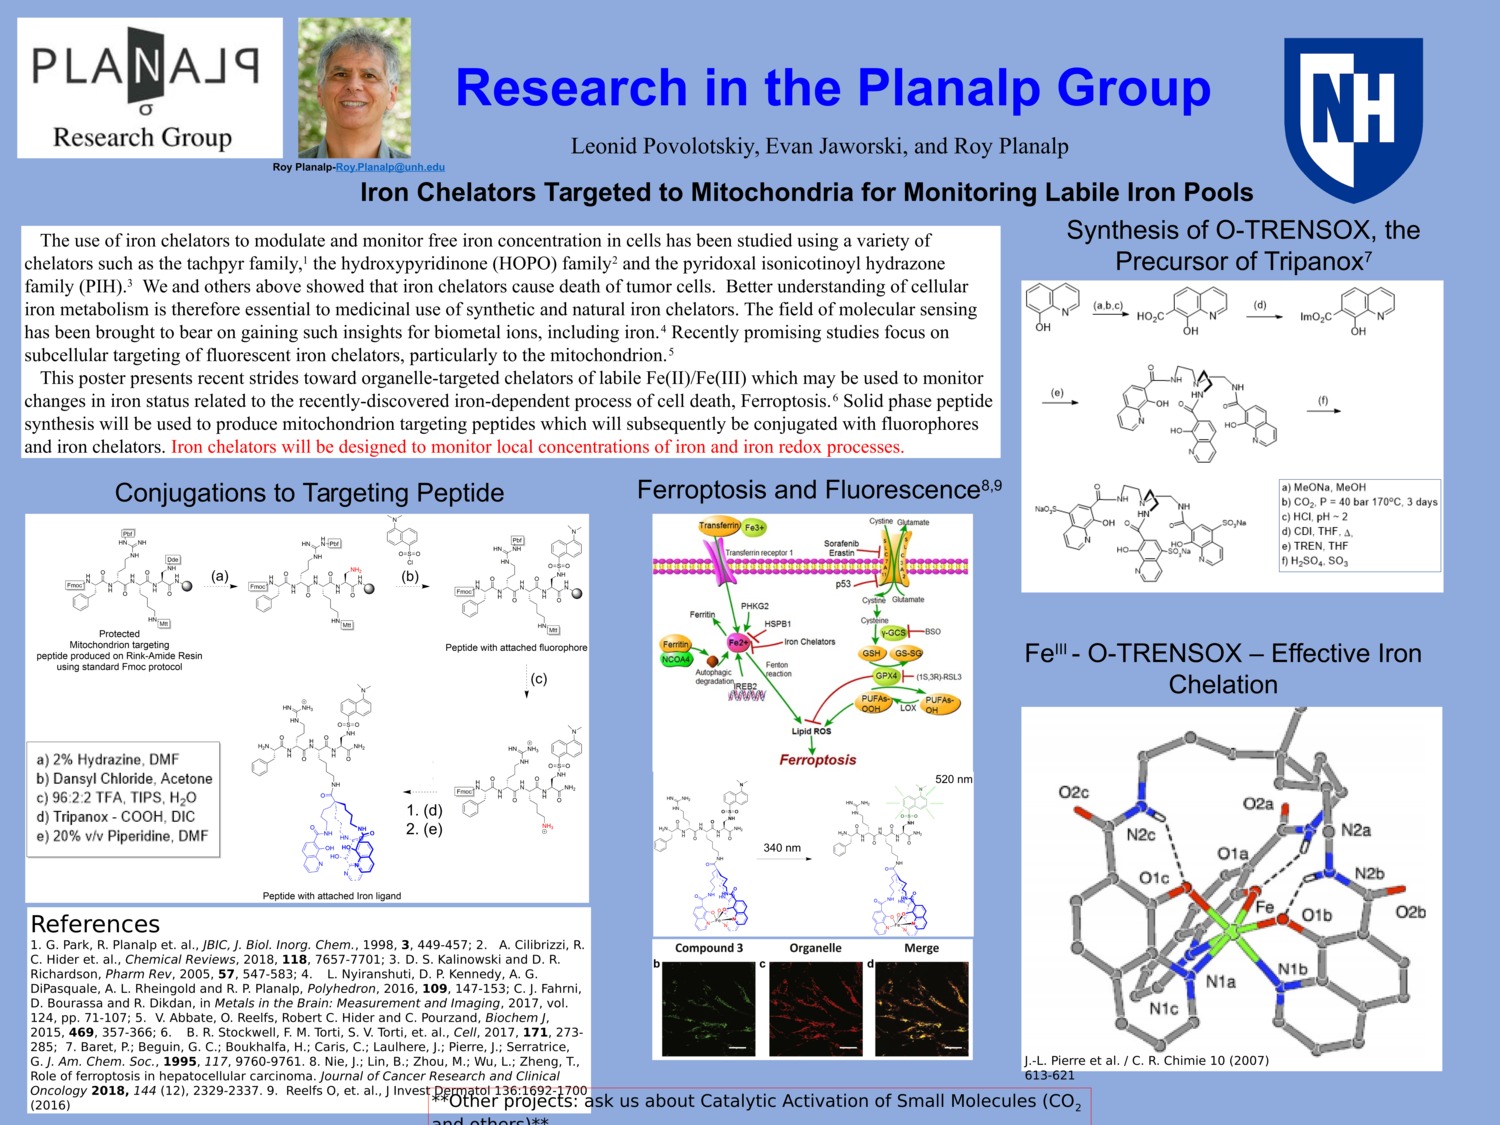 Planalp Research Group Sp2019 by EvanJaws